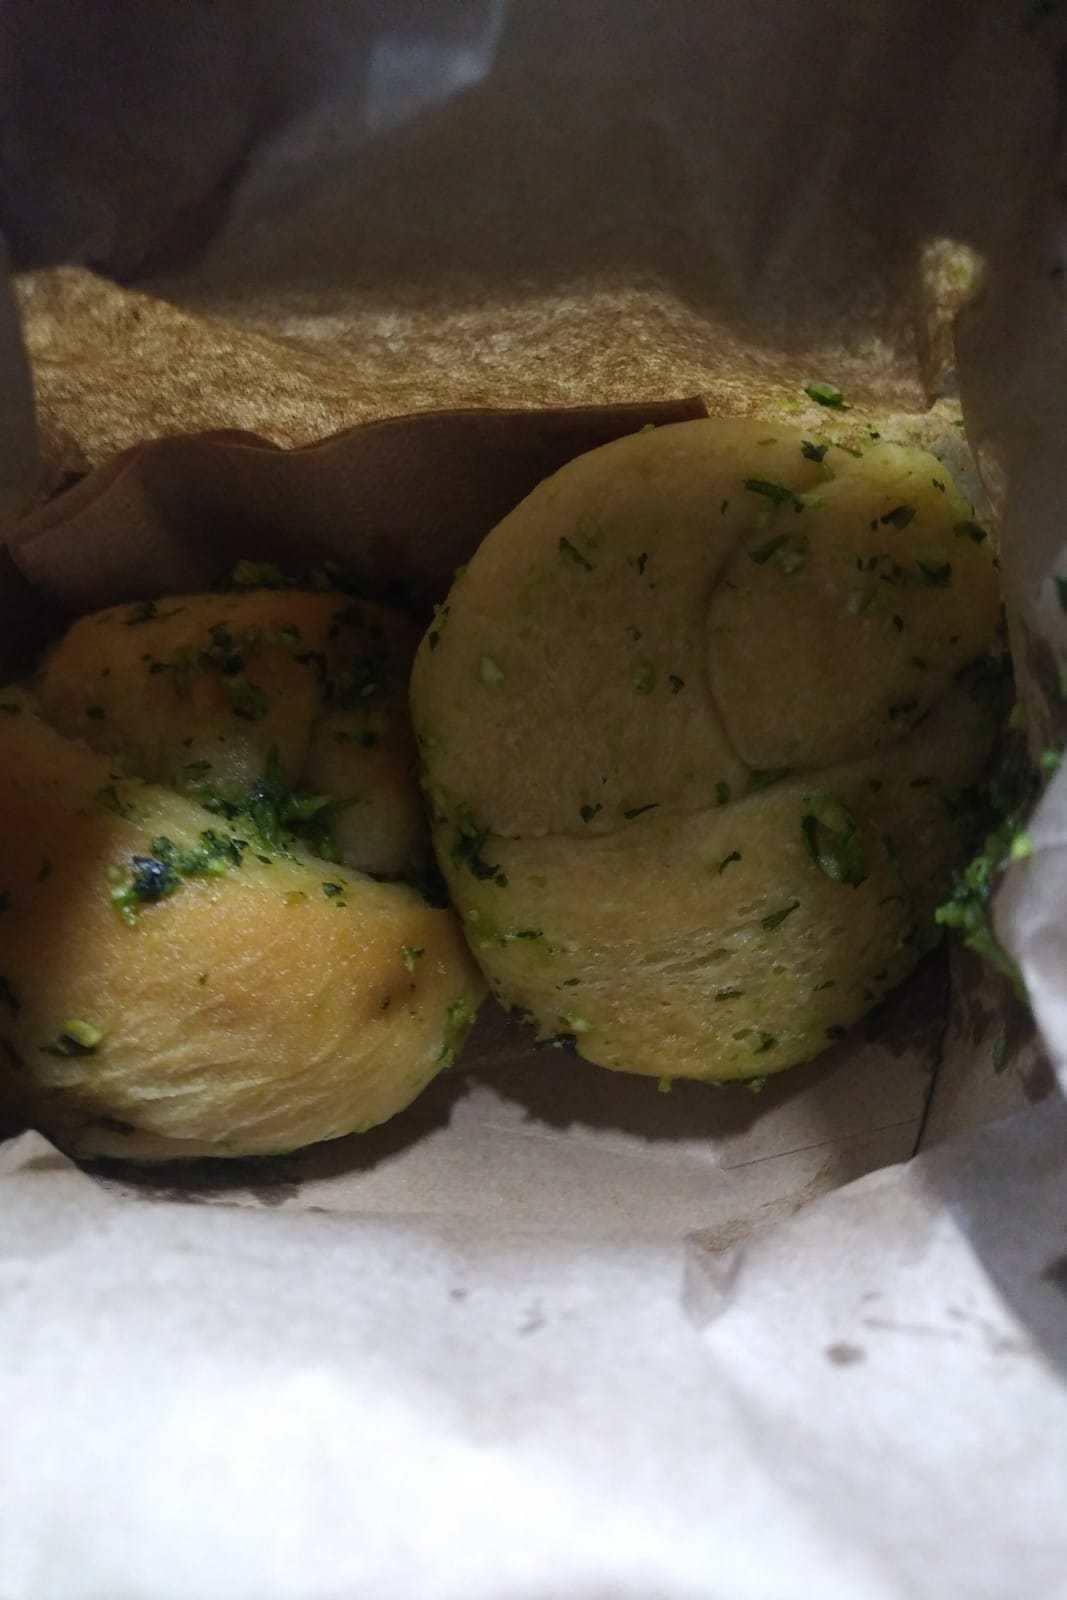 Some amazing Garlic Knots from Sourdough Nation at Vegan Lot!